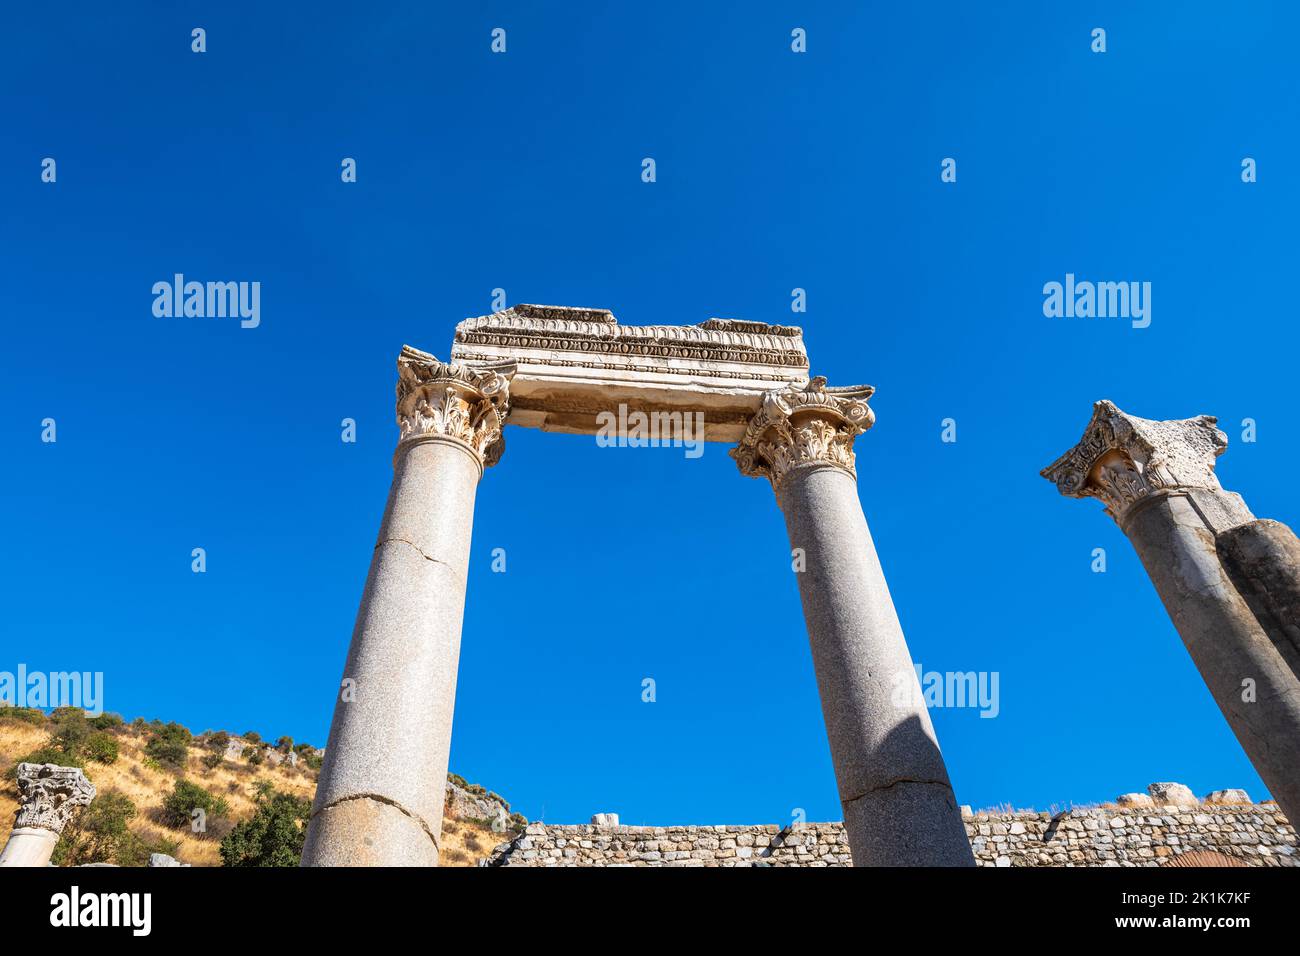 At Ephesus ancient city archeological site, architectural detail of Ephesus buildings, in Turkey. Ephesus is a UNESCO World Heritage site. Stock Photo